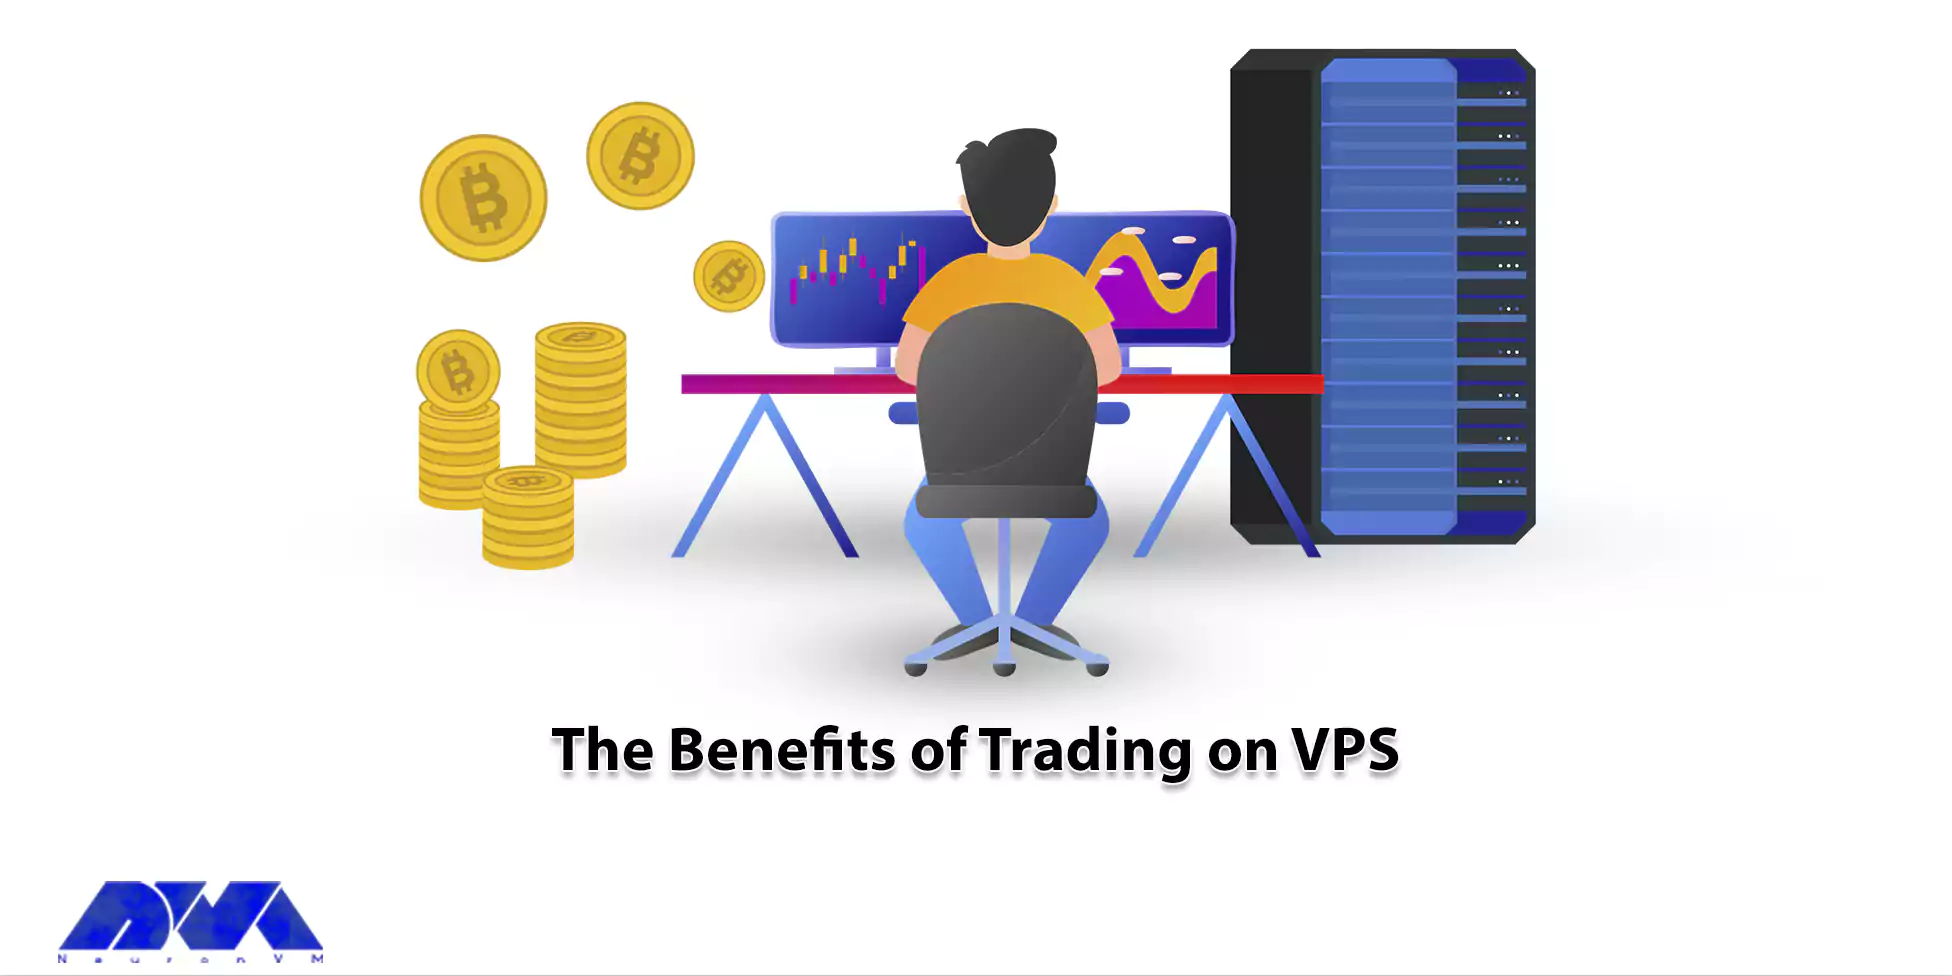 The Benefits of Trading on VPS